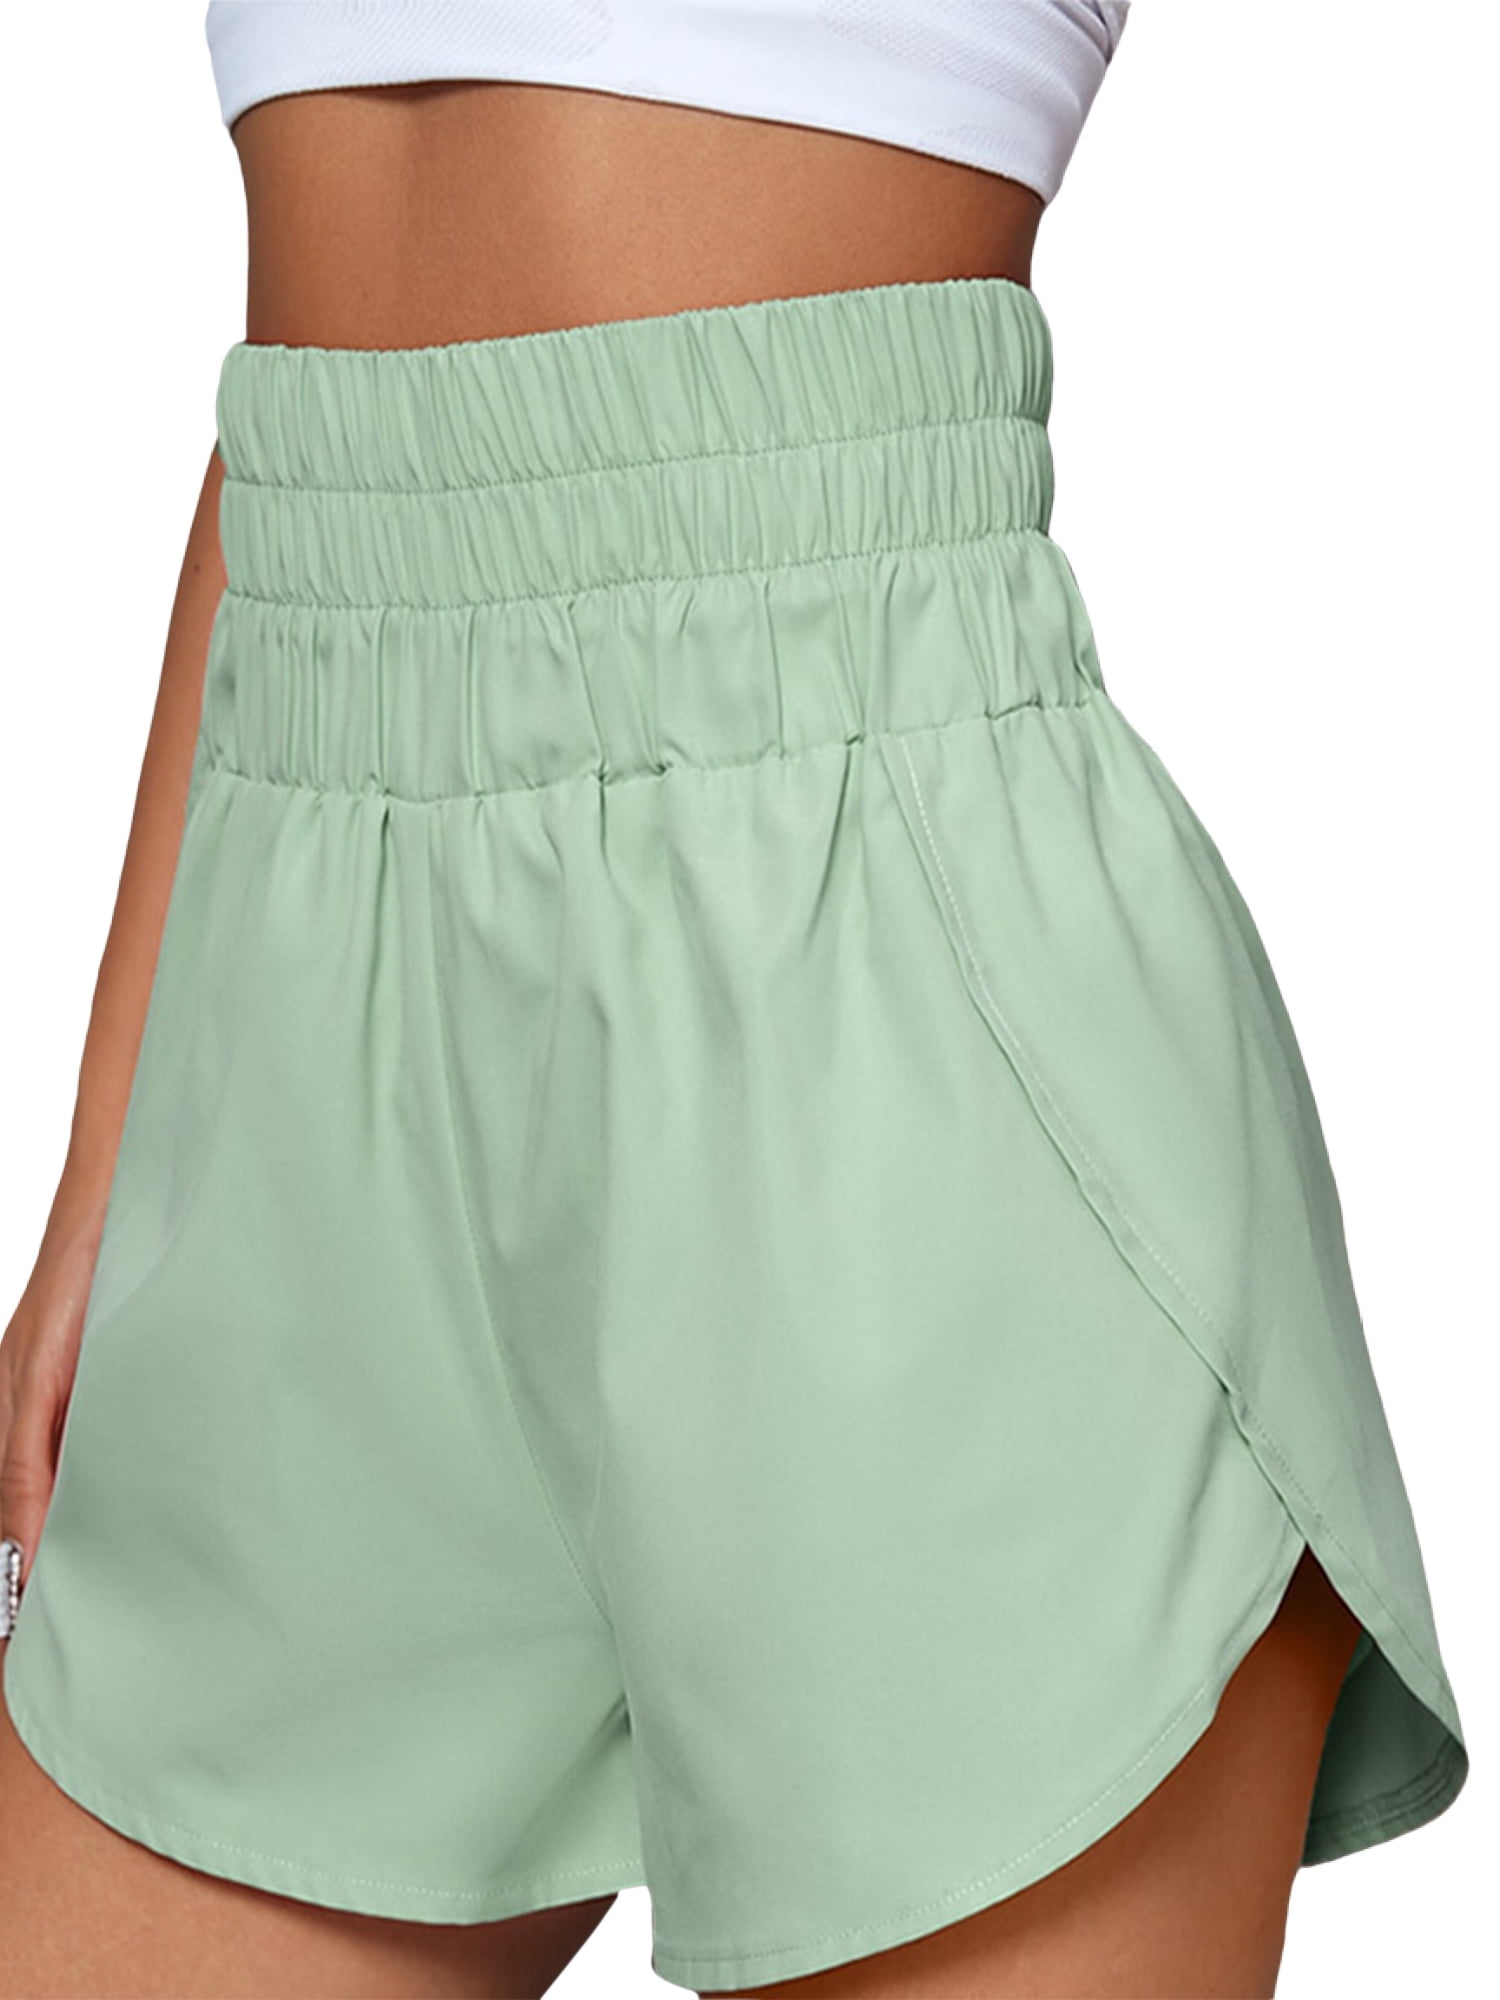 MAWCLOS Ladies Solid Color Bottoms Plain Beach Mini Pant High Waisted ...